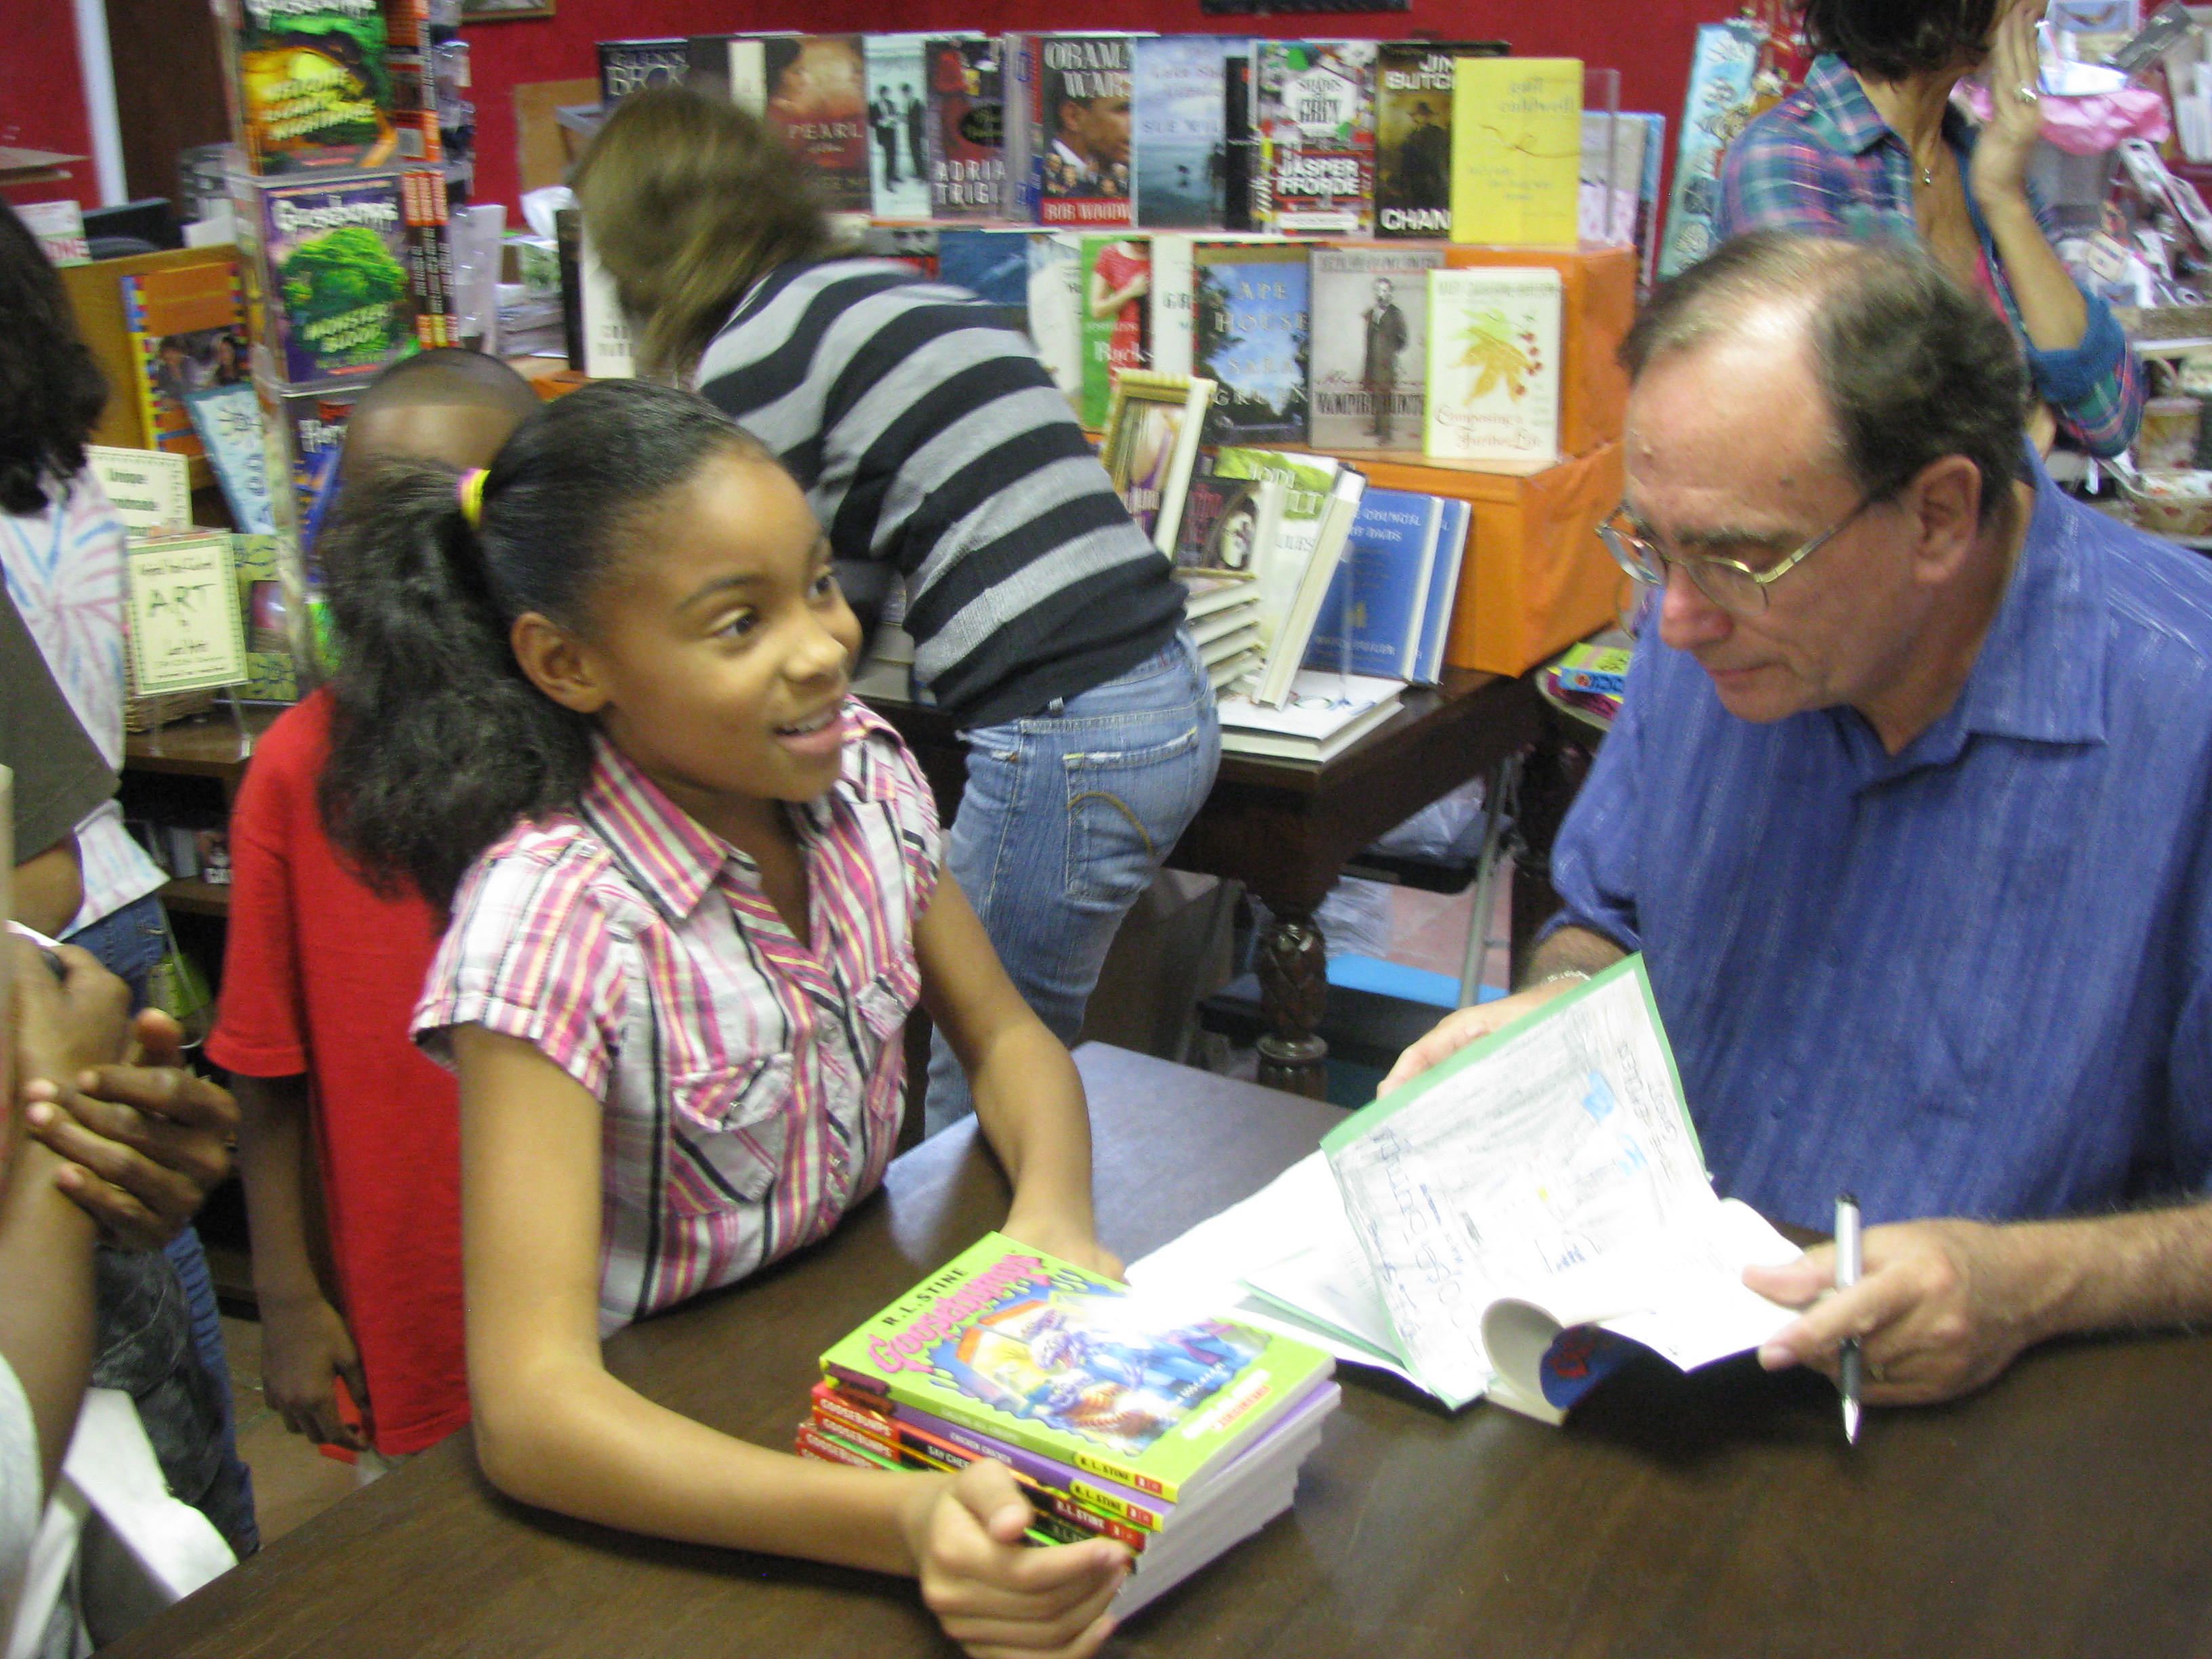 R.L. Stine, author of the "Goosebumps" series for children, signs 9-year-old A'Jadah Mitchell's stack of books Wednesday evening at Undercover Books and Gifts.